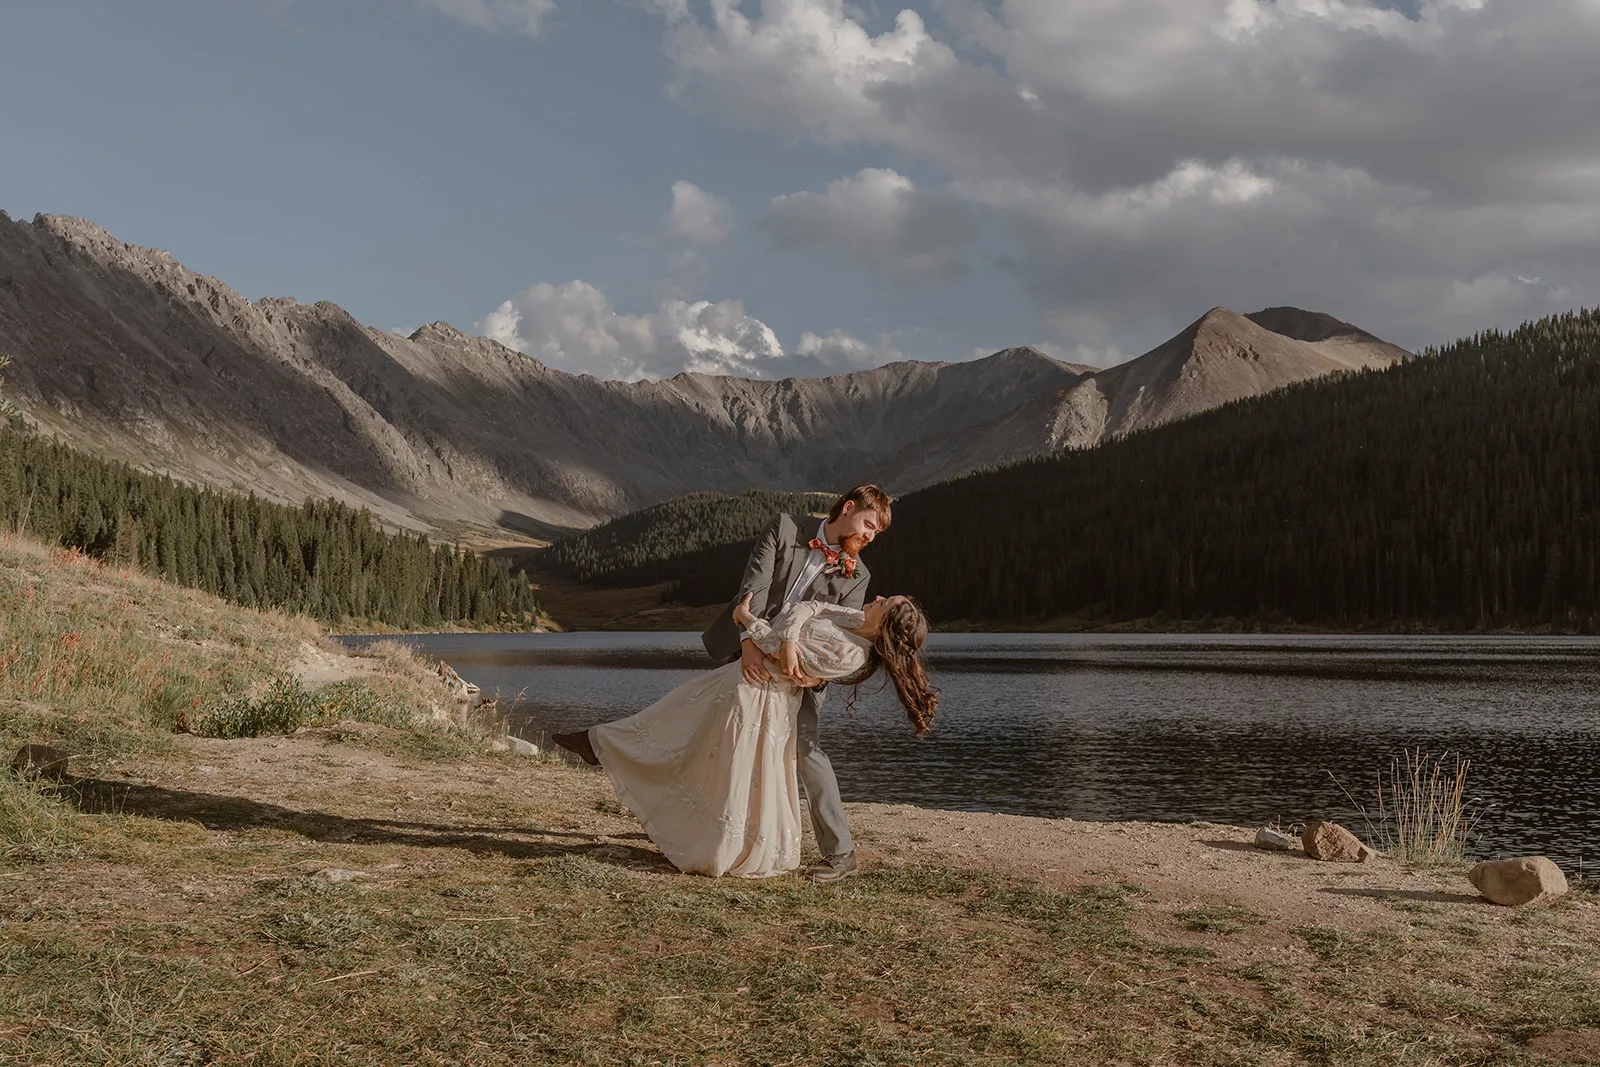 A couple embraces and dips during their elopement ceremony, a self-solemnization adventure elopement in Colorado.